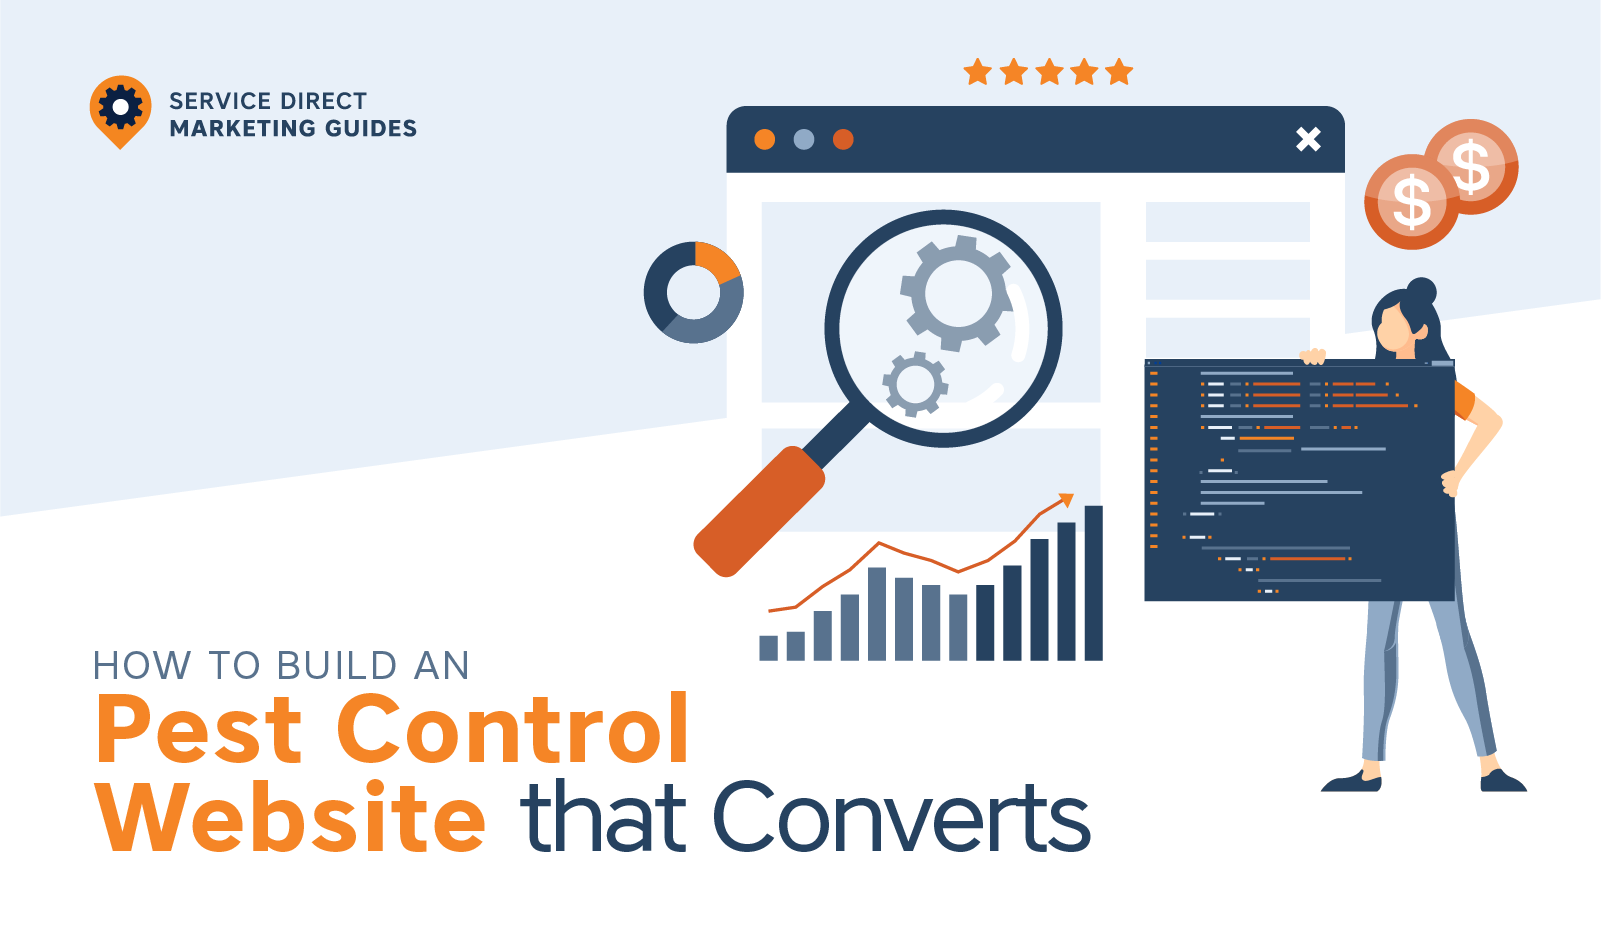 How to Build a Pest Control Website that Converts